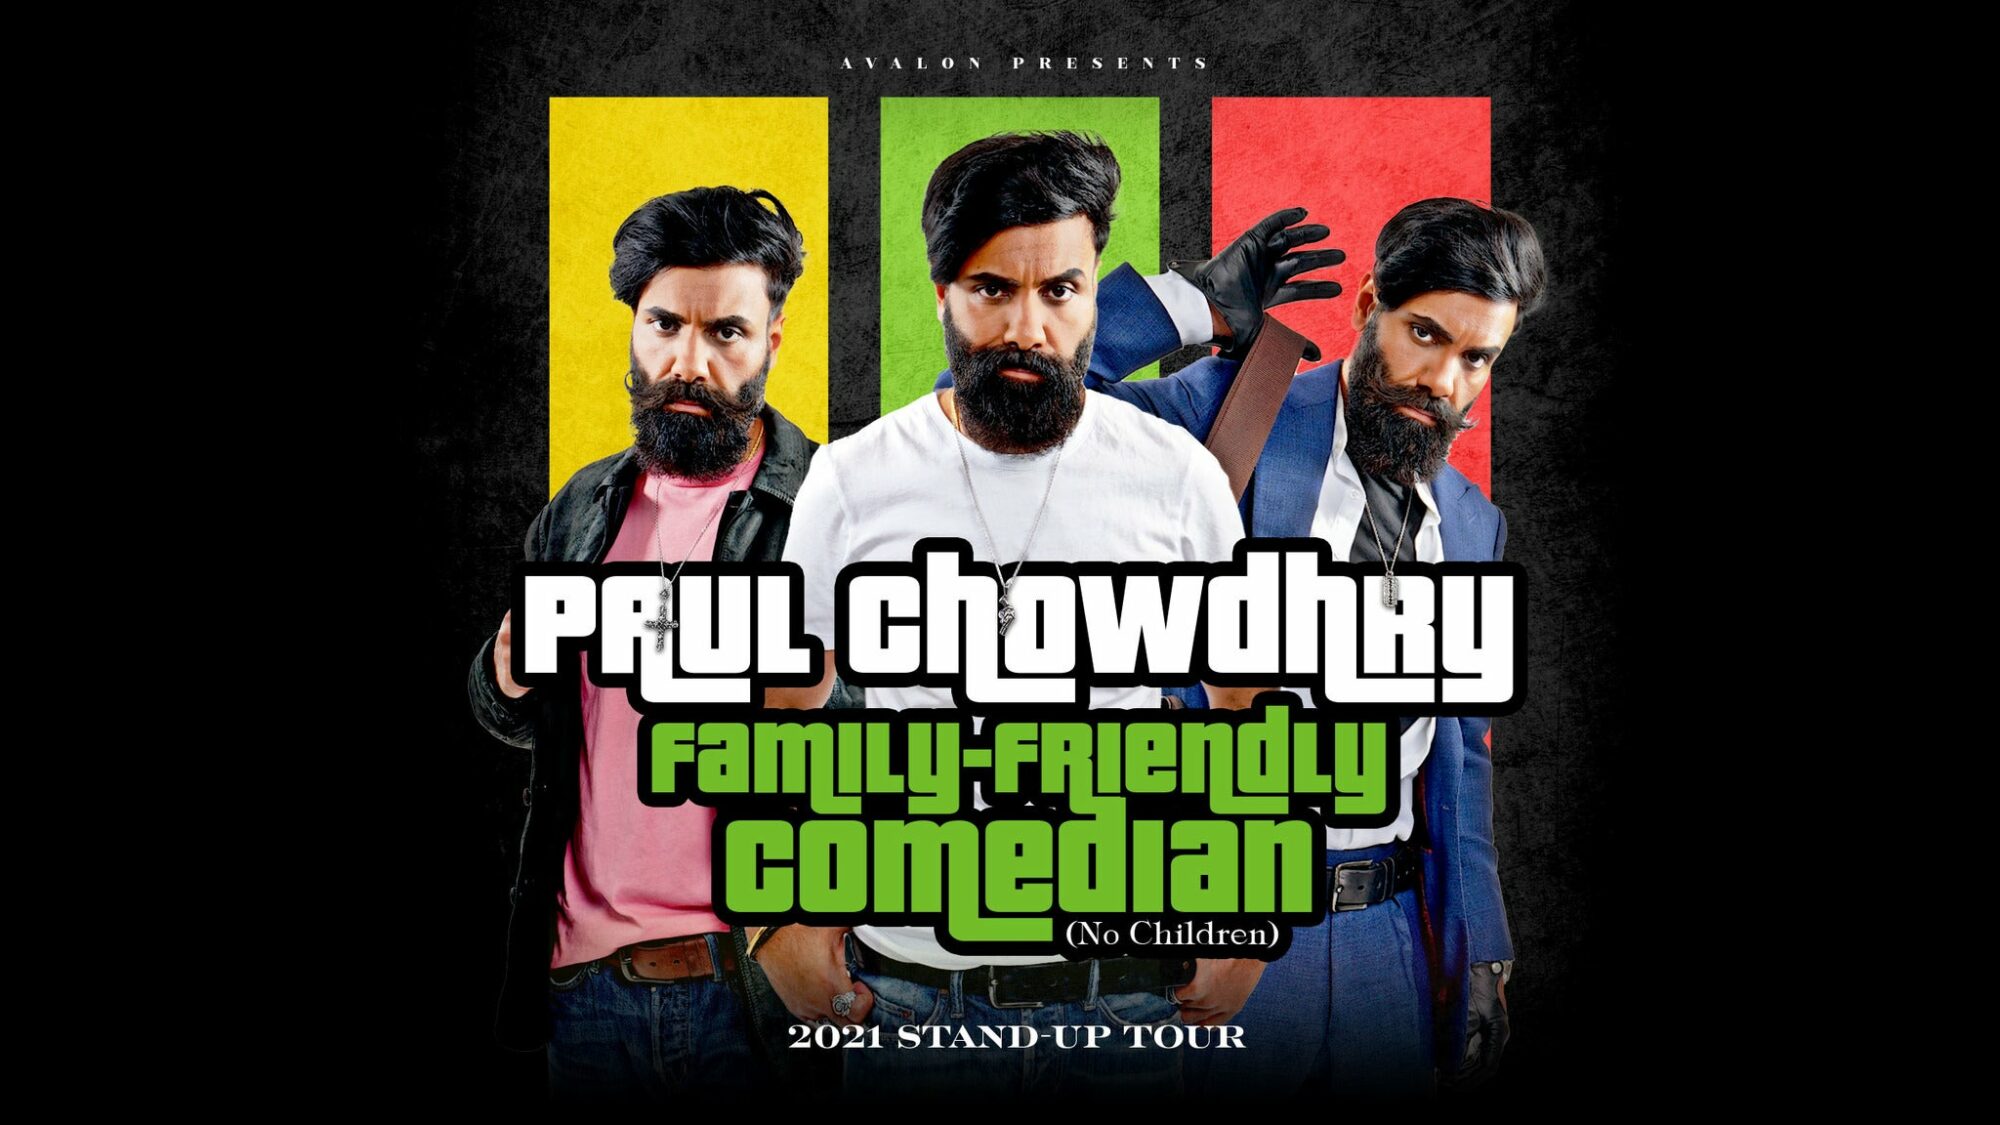 Image name Paul Chowdhry Family Friendly Comedian at St Georges Hall Bradford Bradford the 13 image from the post Paul Chowdhry: Family Friendly Comedian at St Georges Hall, Bradford, Bradford in Yorkshire.com.